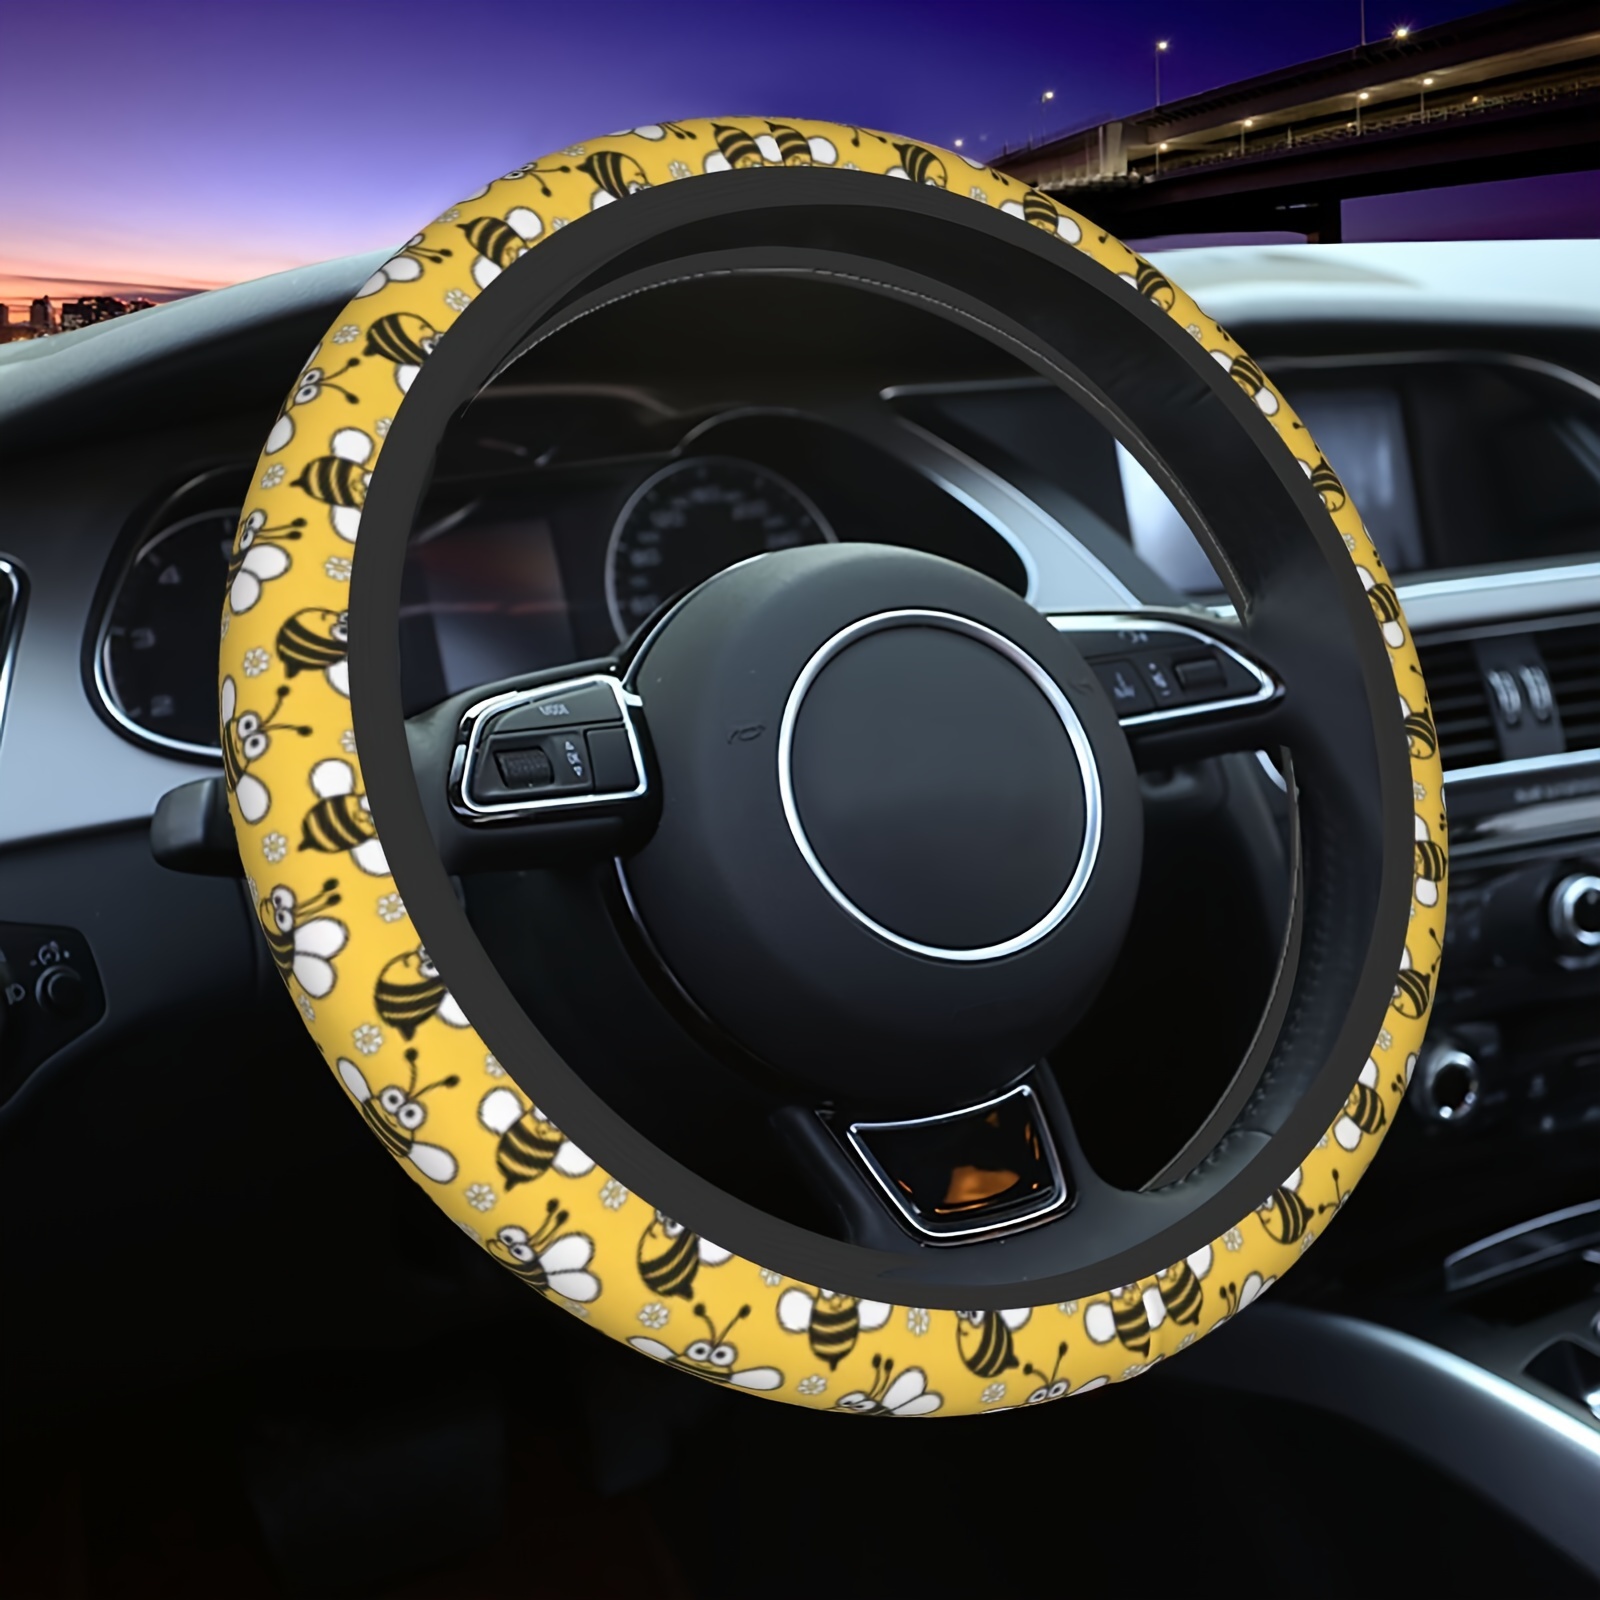 

Bee Auto Steering Wheel Covers, Steering Wheel Protection,- 15 Inch Universal Soft Anti Slip Cute Steering Wheel Covers Durable Car Accessories Decor